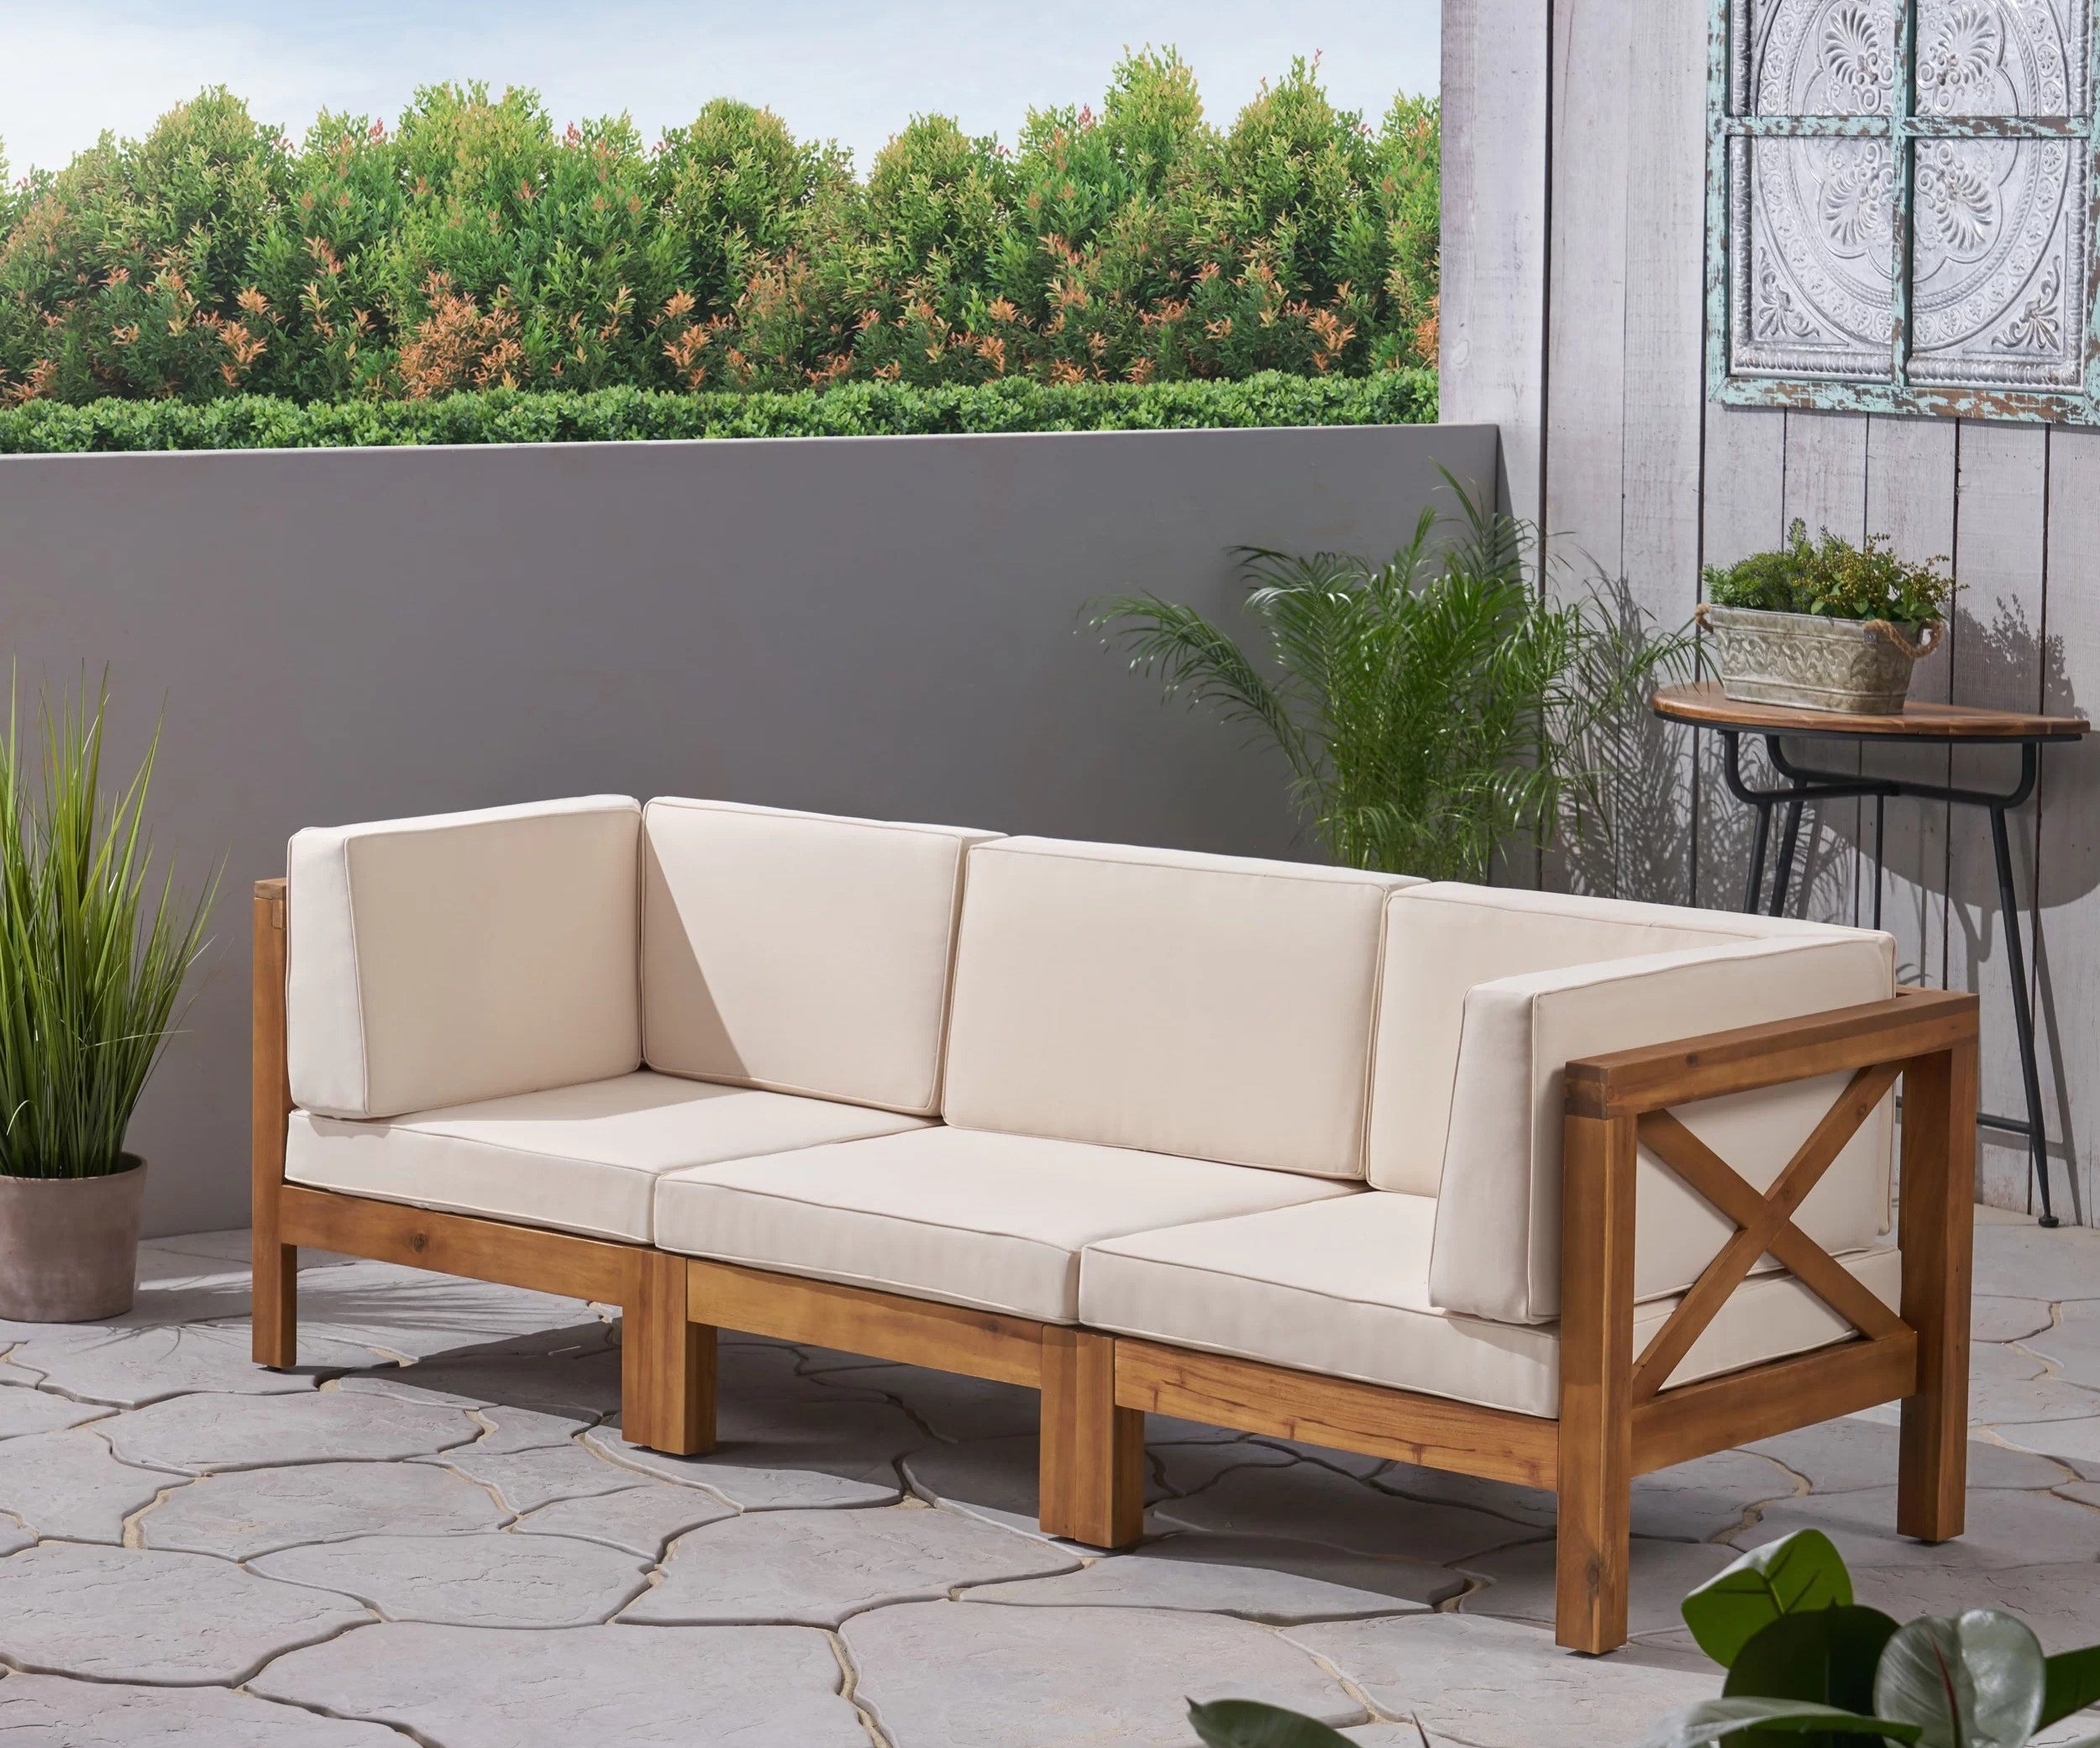 A wood sofa with beige cushions is shown on a patio